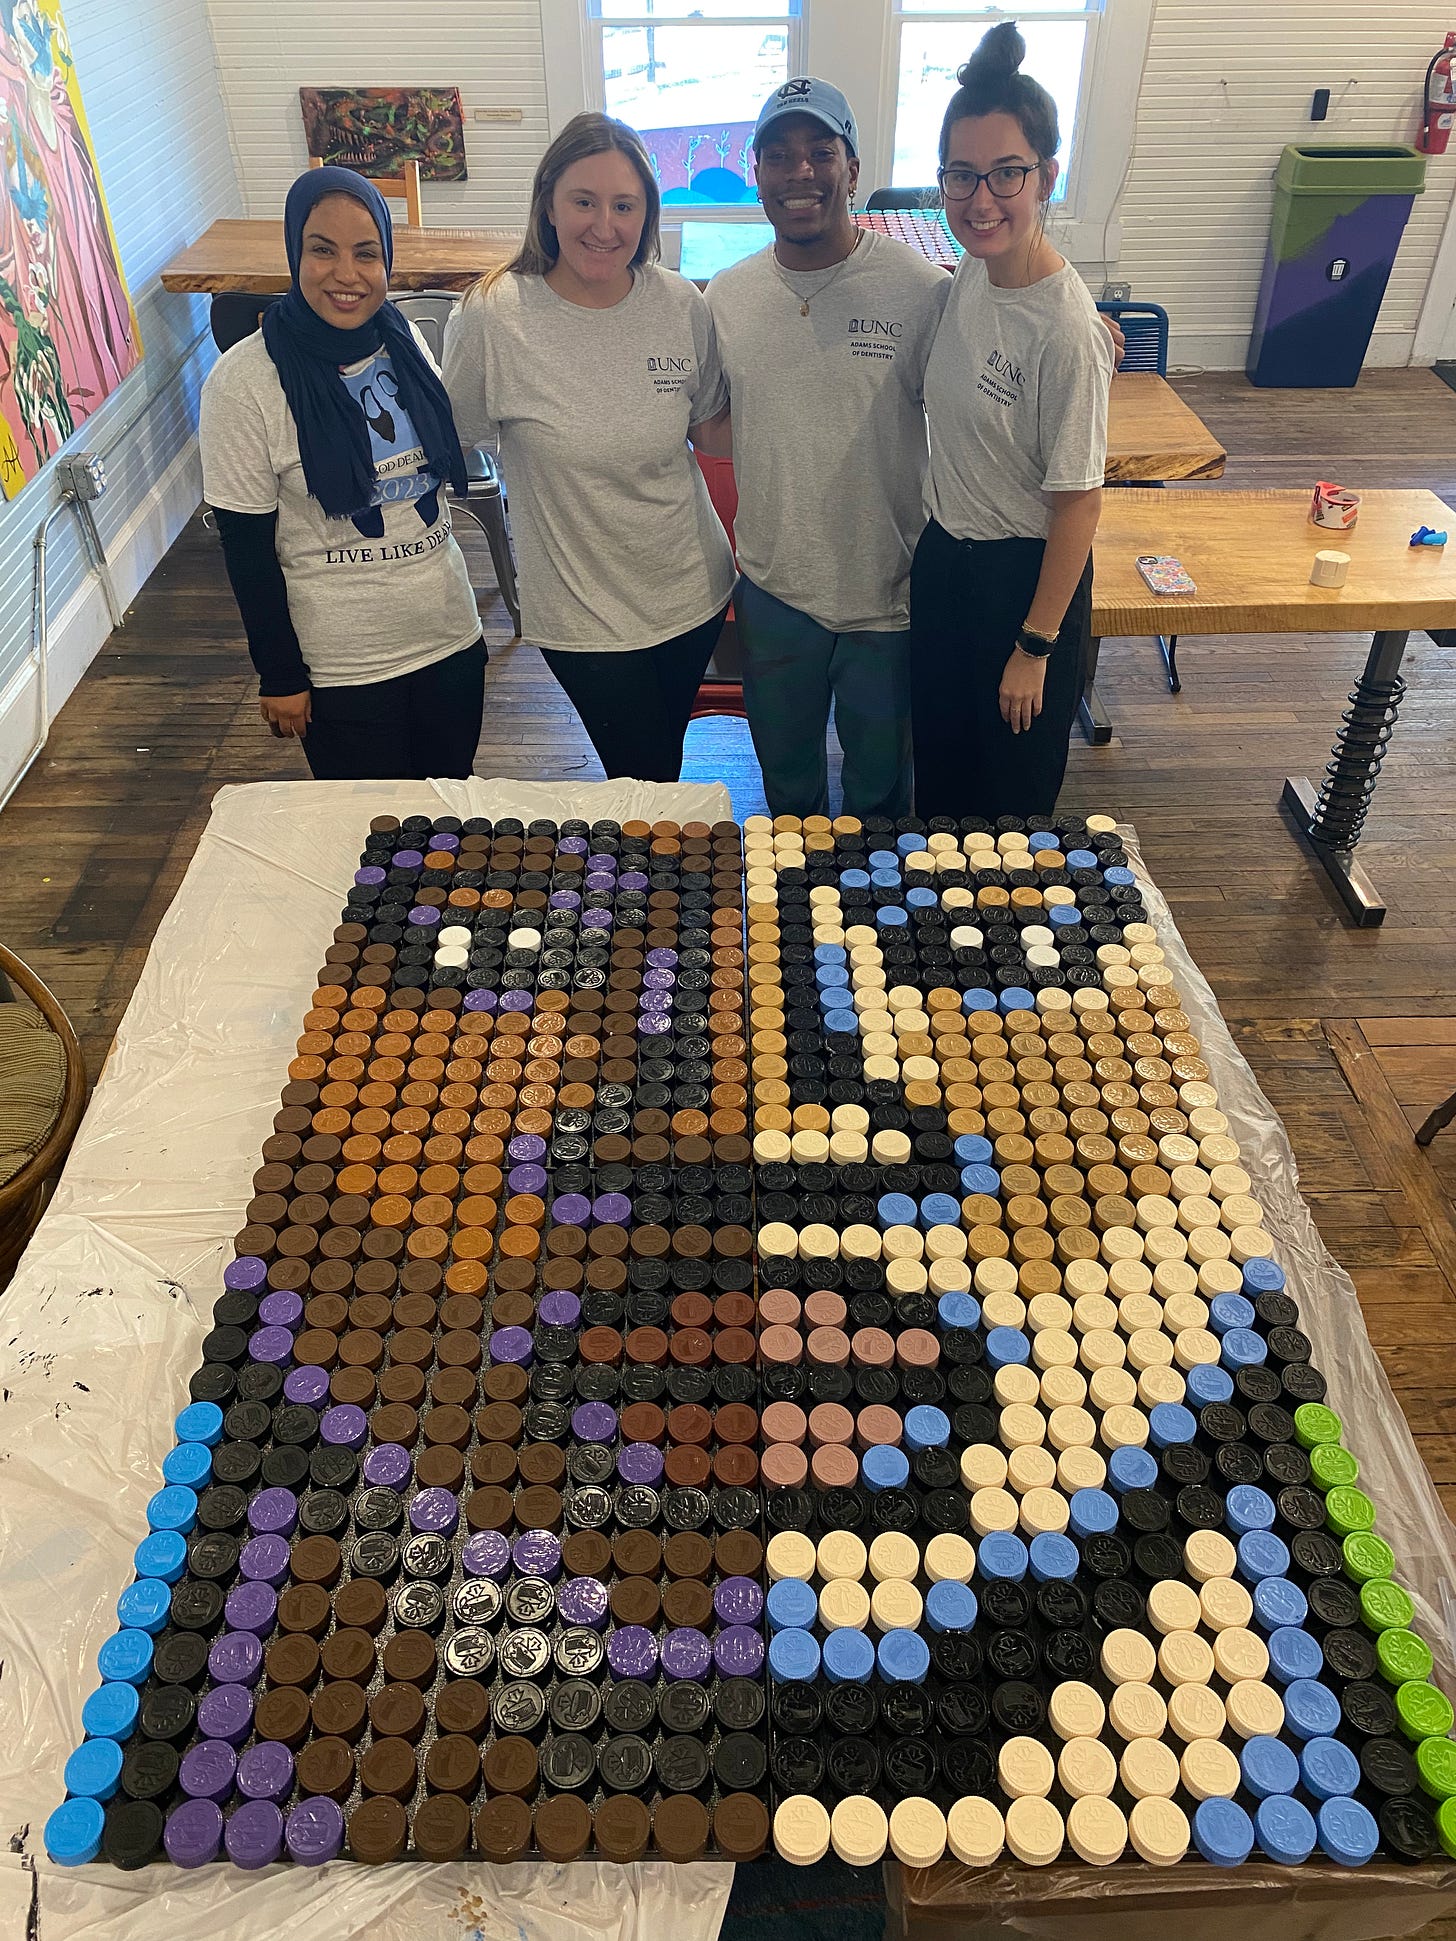 4 UNC students with the completed piece